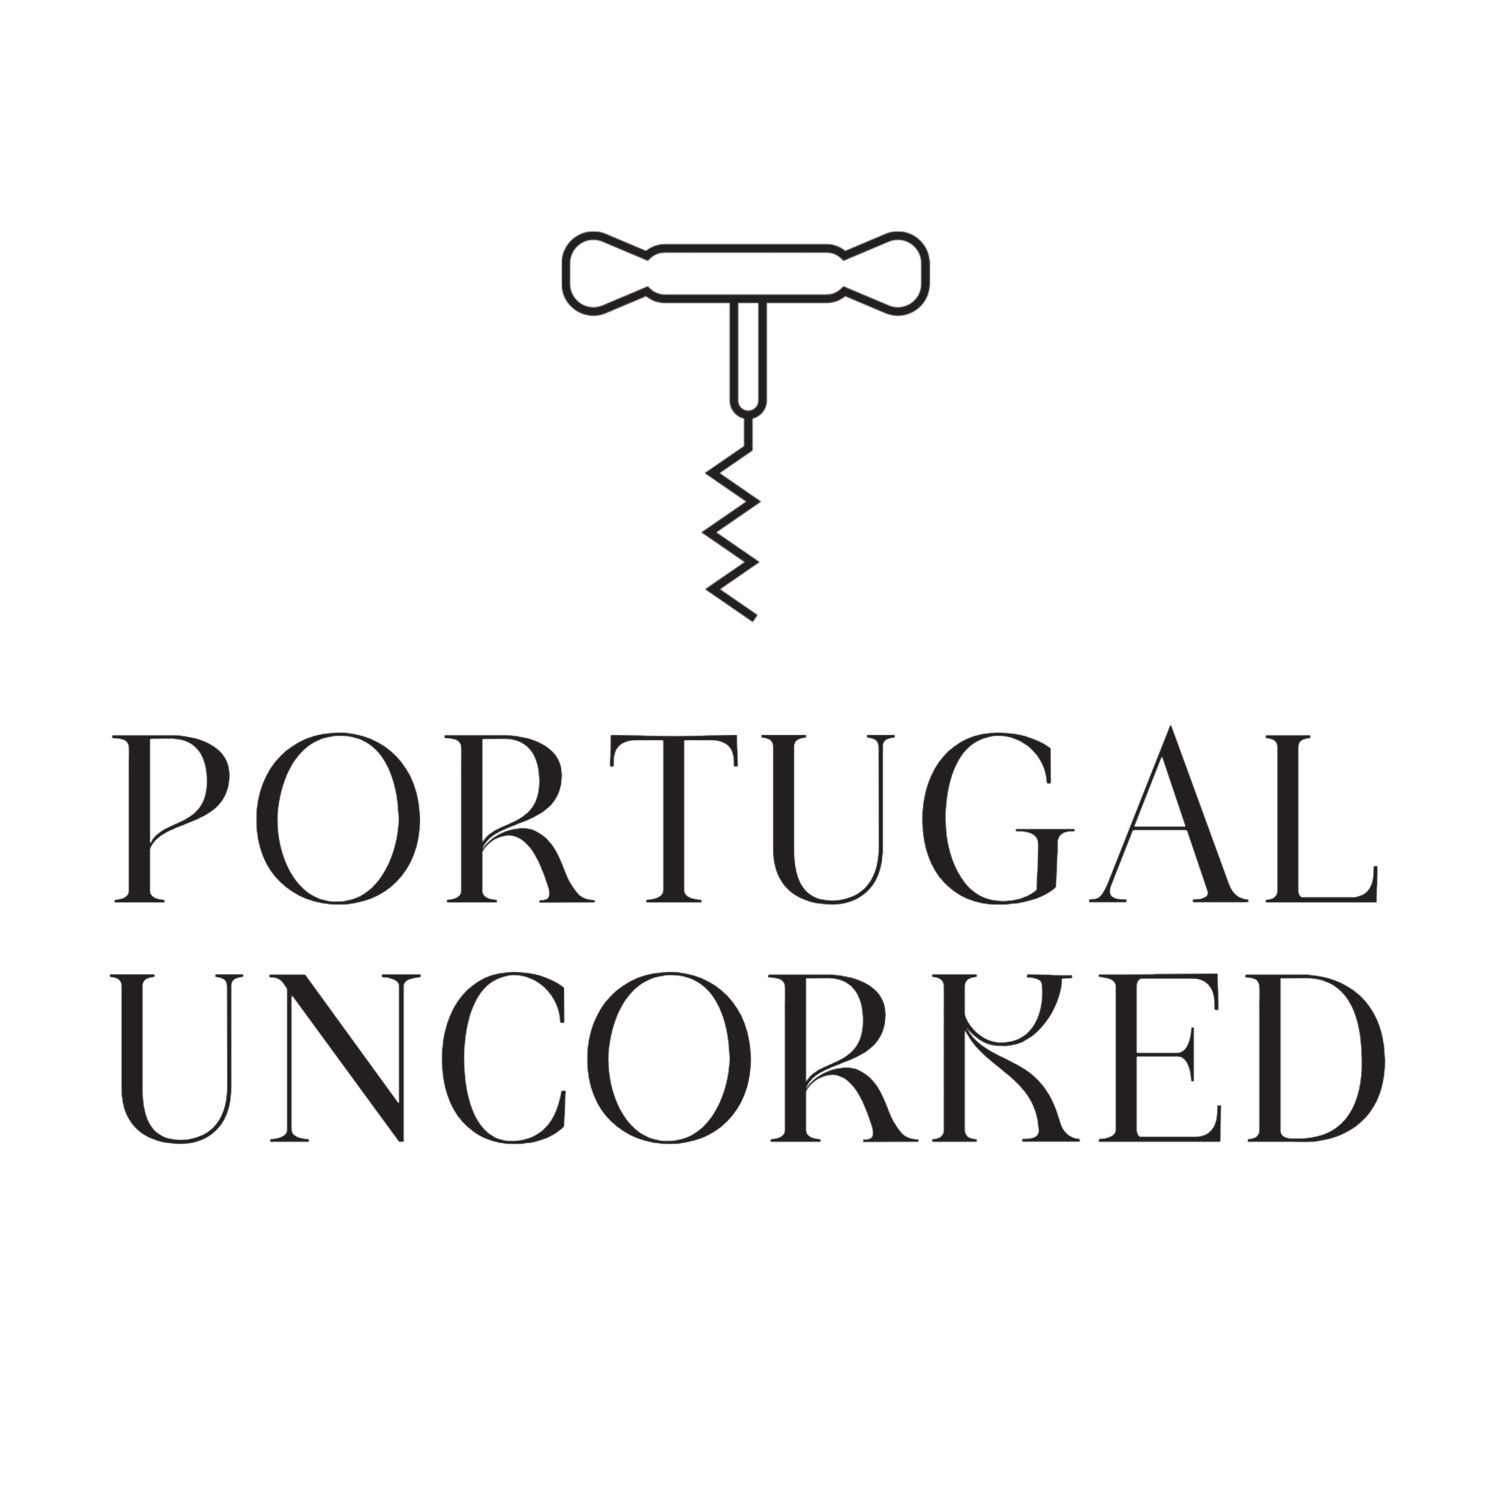 Portugal Uncorked